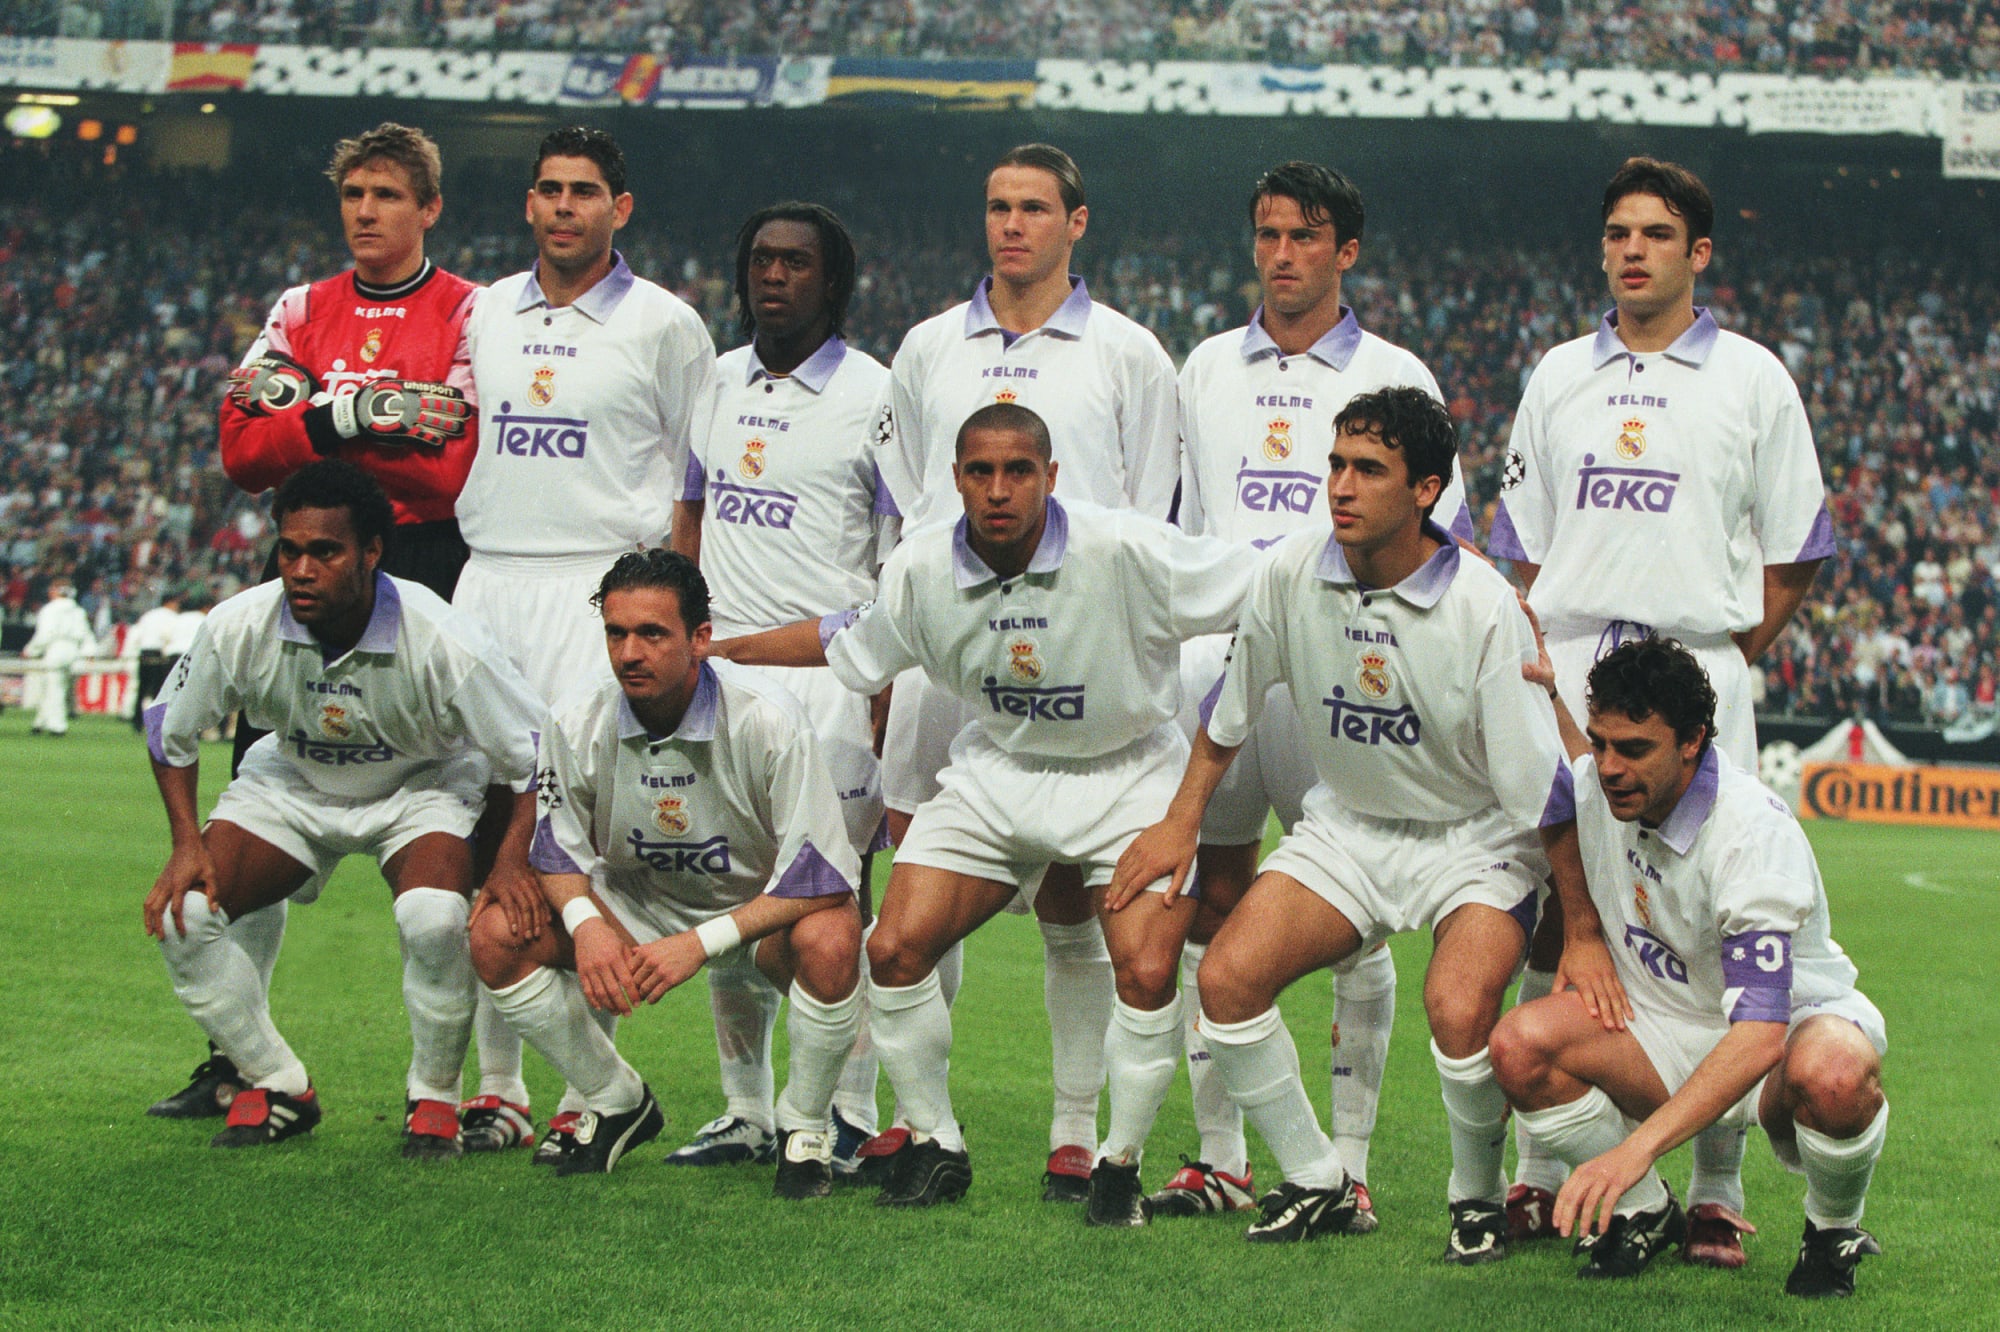 real madrid 98 champions league